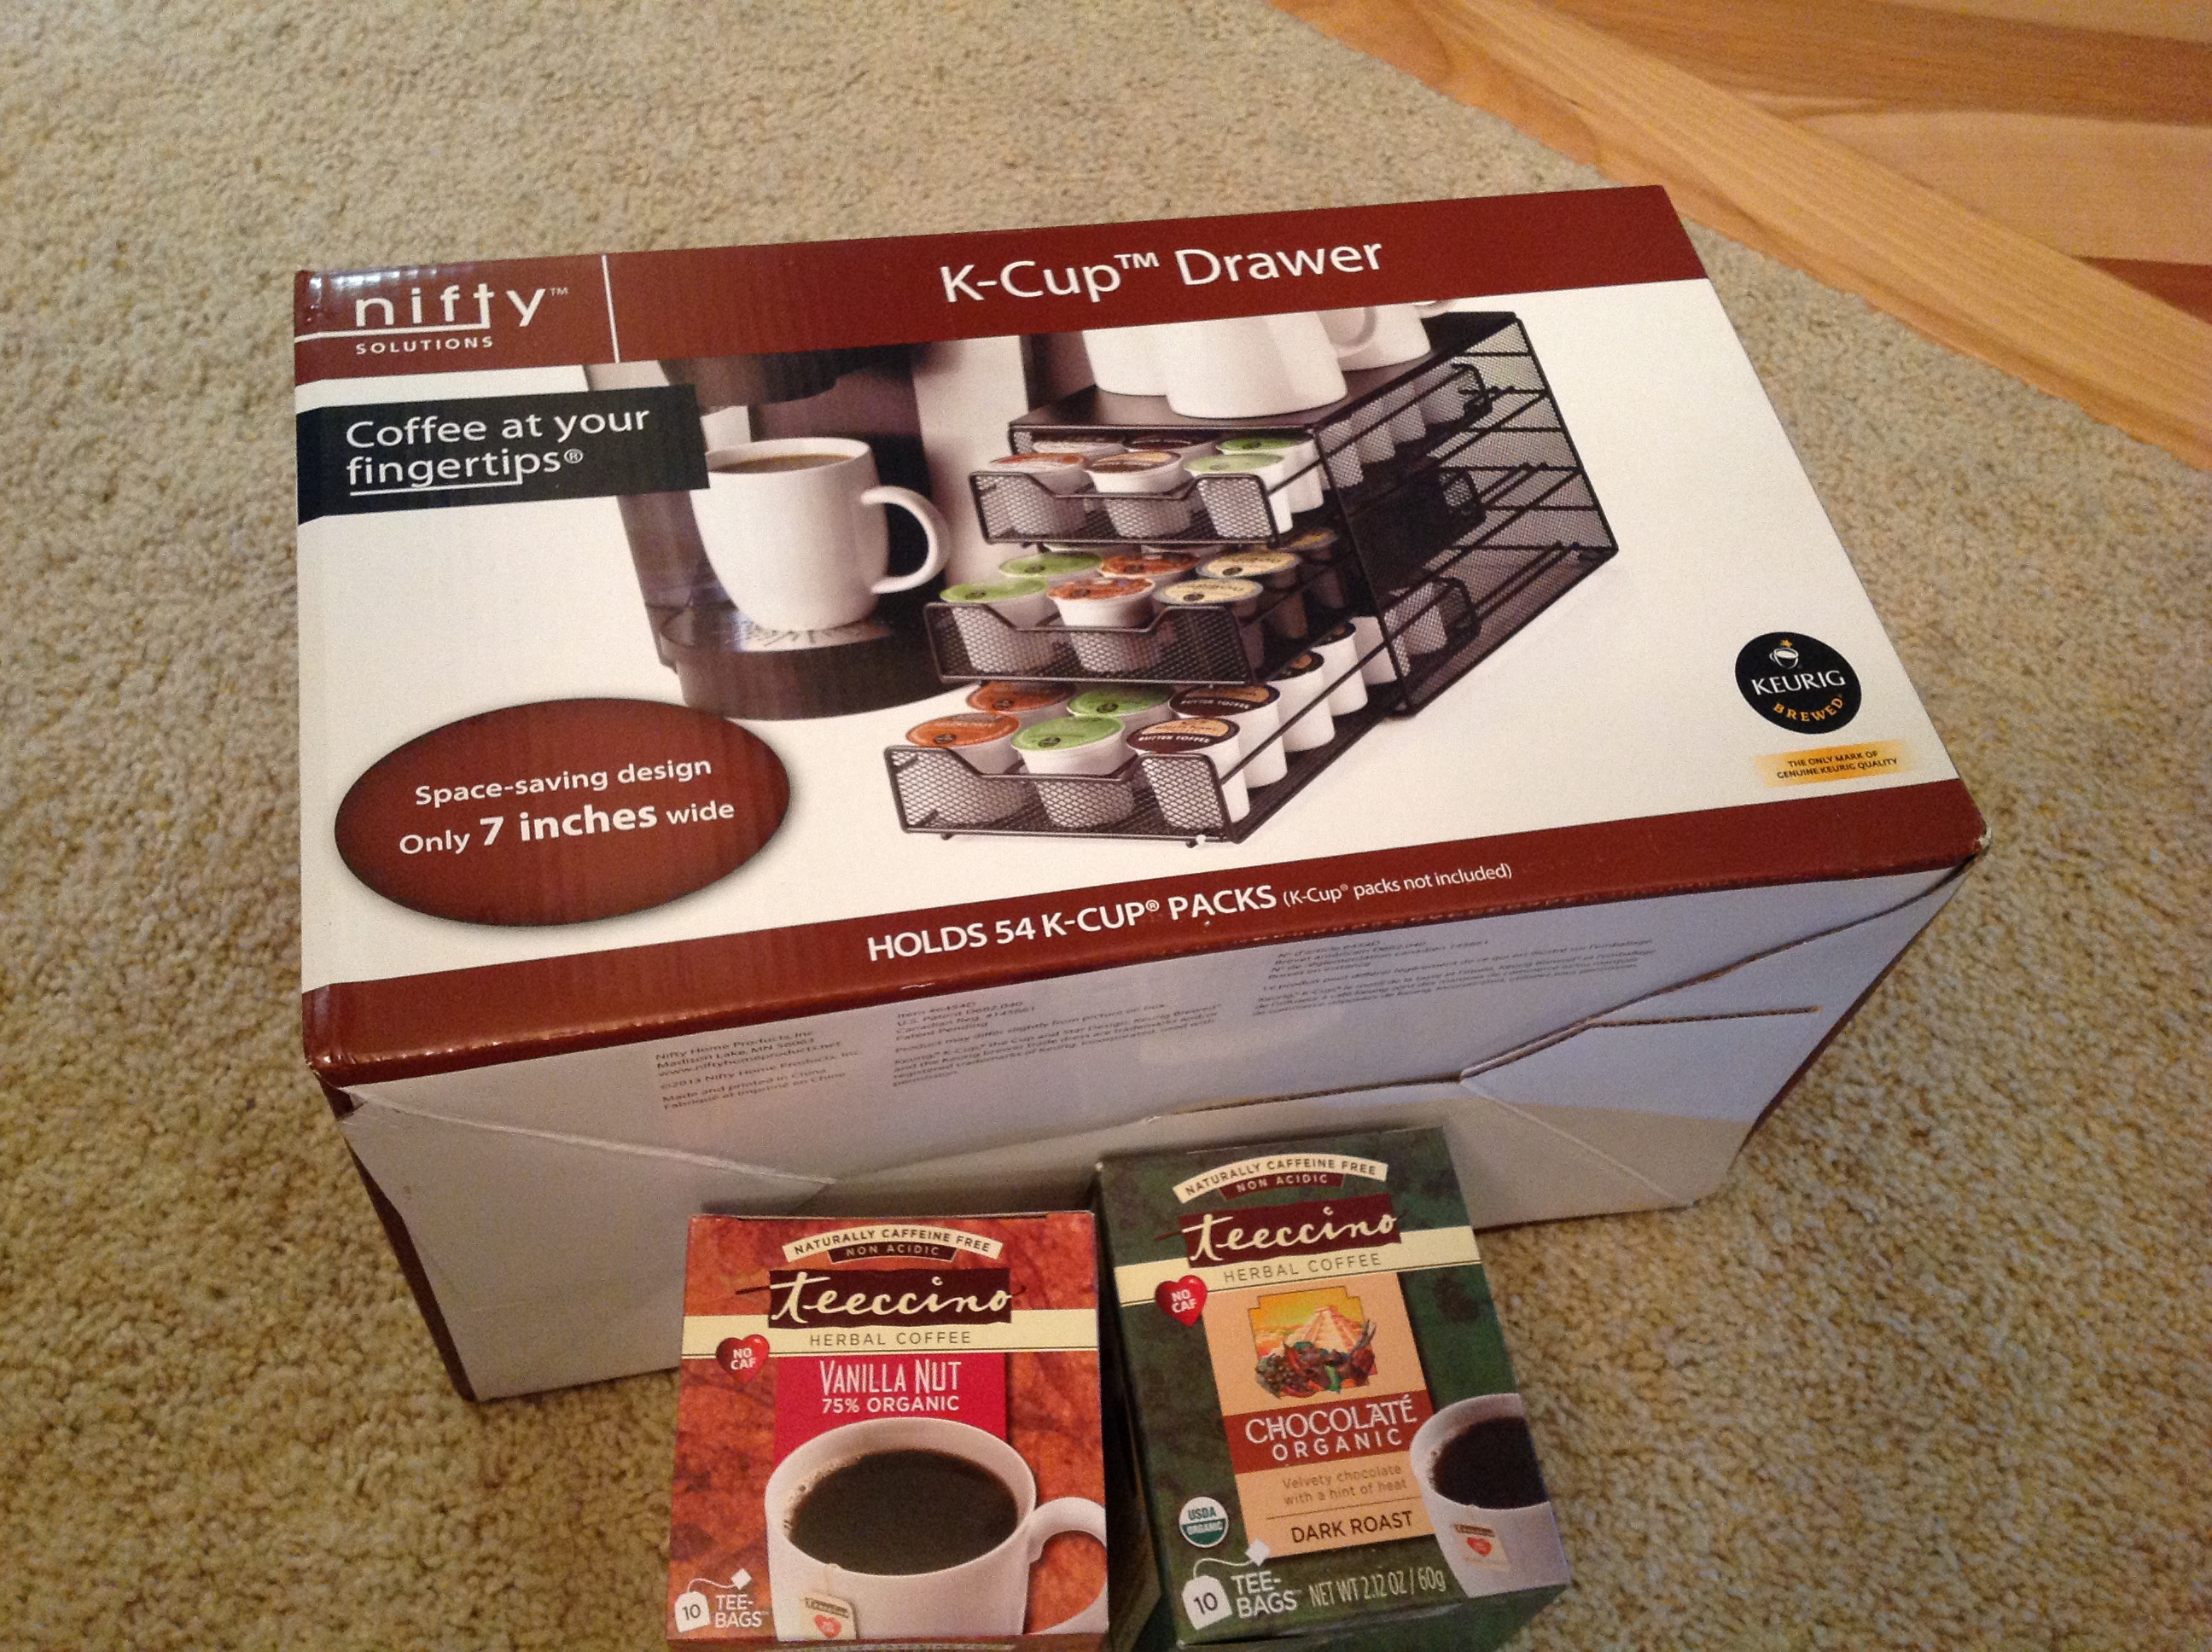 I got this Kcup drawer at Zulily for $20;original price $36. I got the herbal coffee at Amazon.